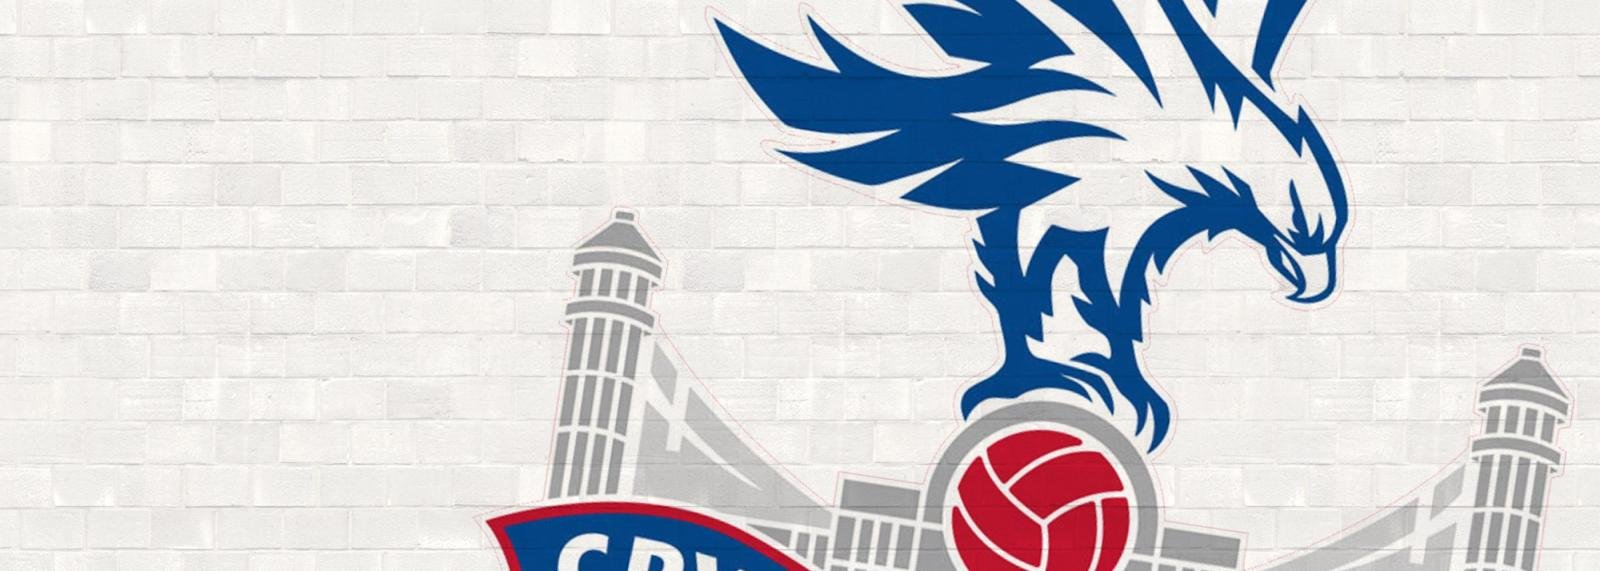 Premier League survival secured, Crystal Palace can focus on the FA Cup final